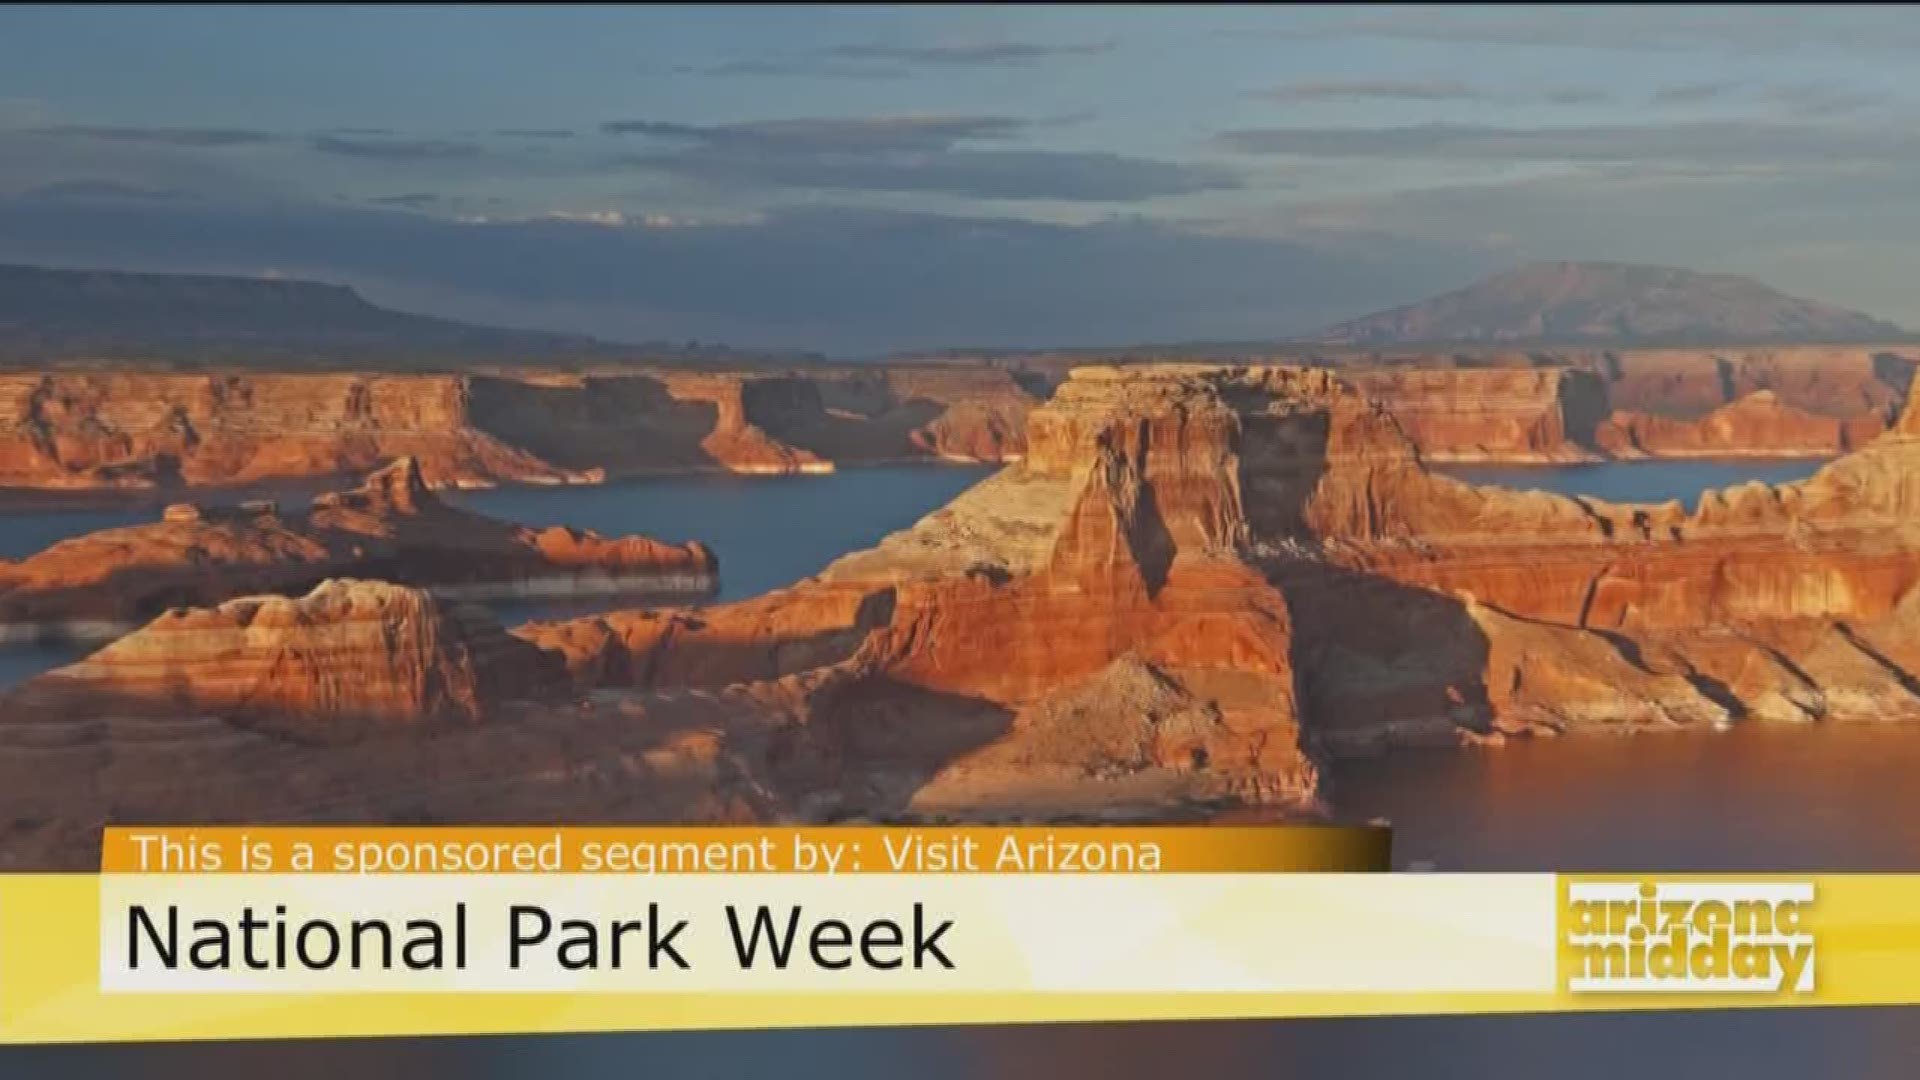 Scott Dunn with the Arizona Office of Tourism is giving us the scoop on National Parks Week and the must-see spots in Arizona